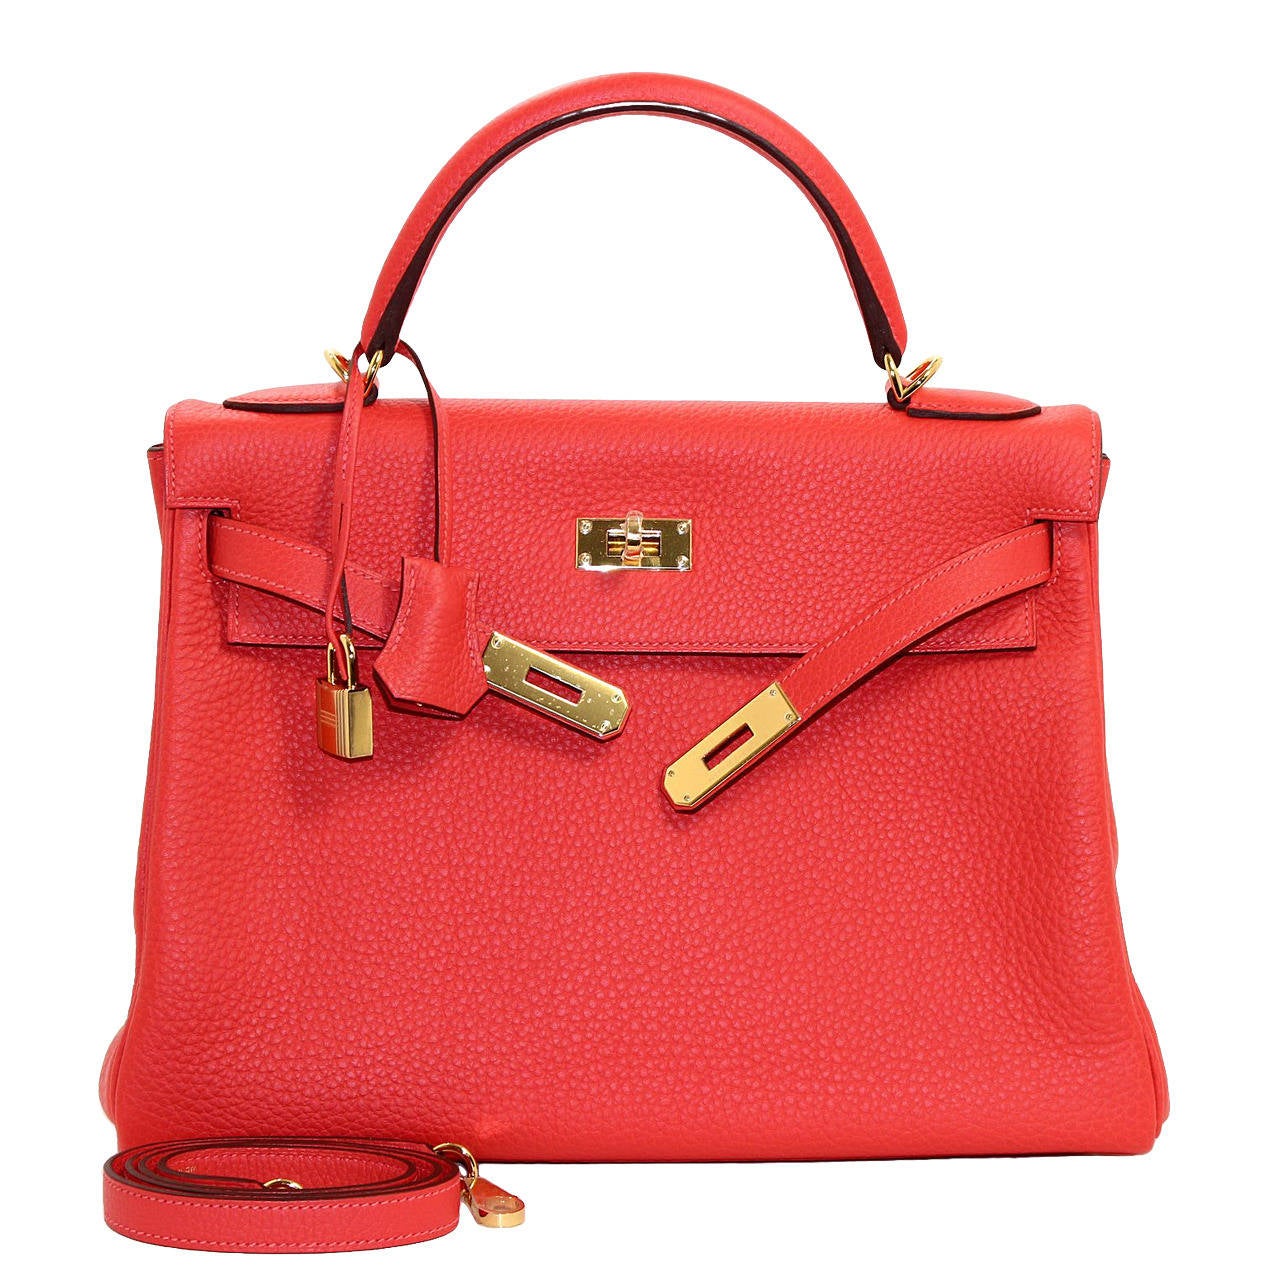 Hermes Kelly Bag in Rouge Pivoine Clemence Red Leather, GHW, 32 cm size ...